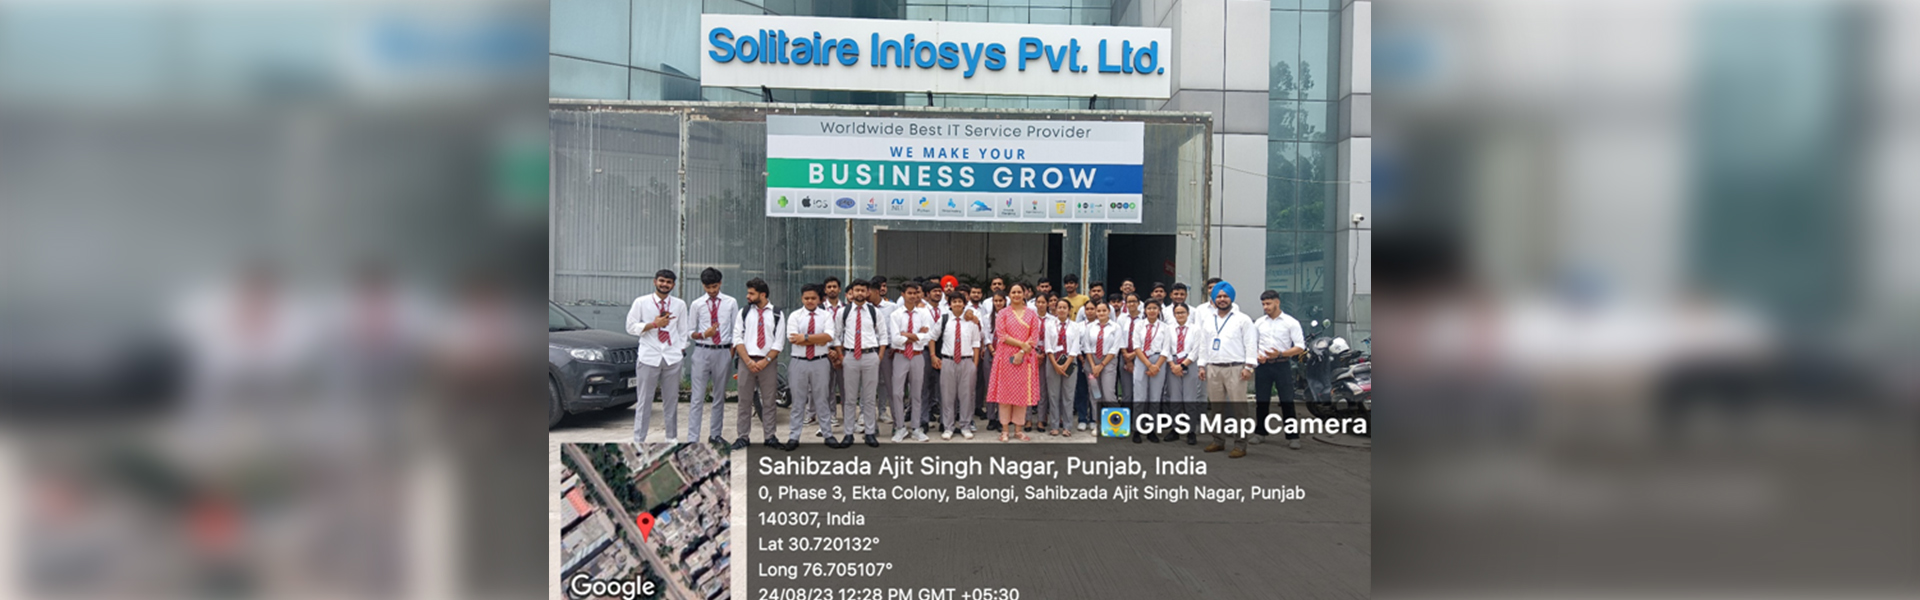 Industrial visit to Solitaire Infosys, Pvt. Ltd, Mohali 